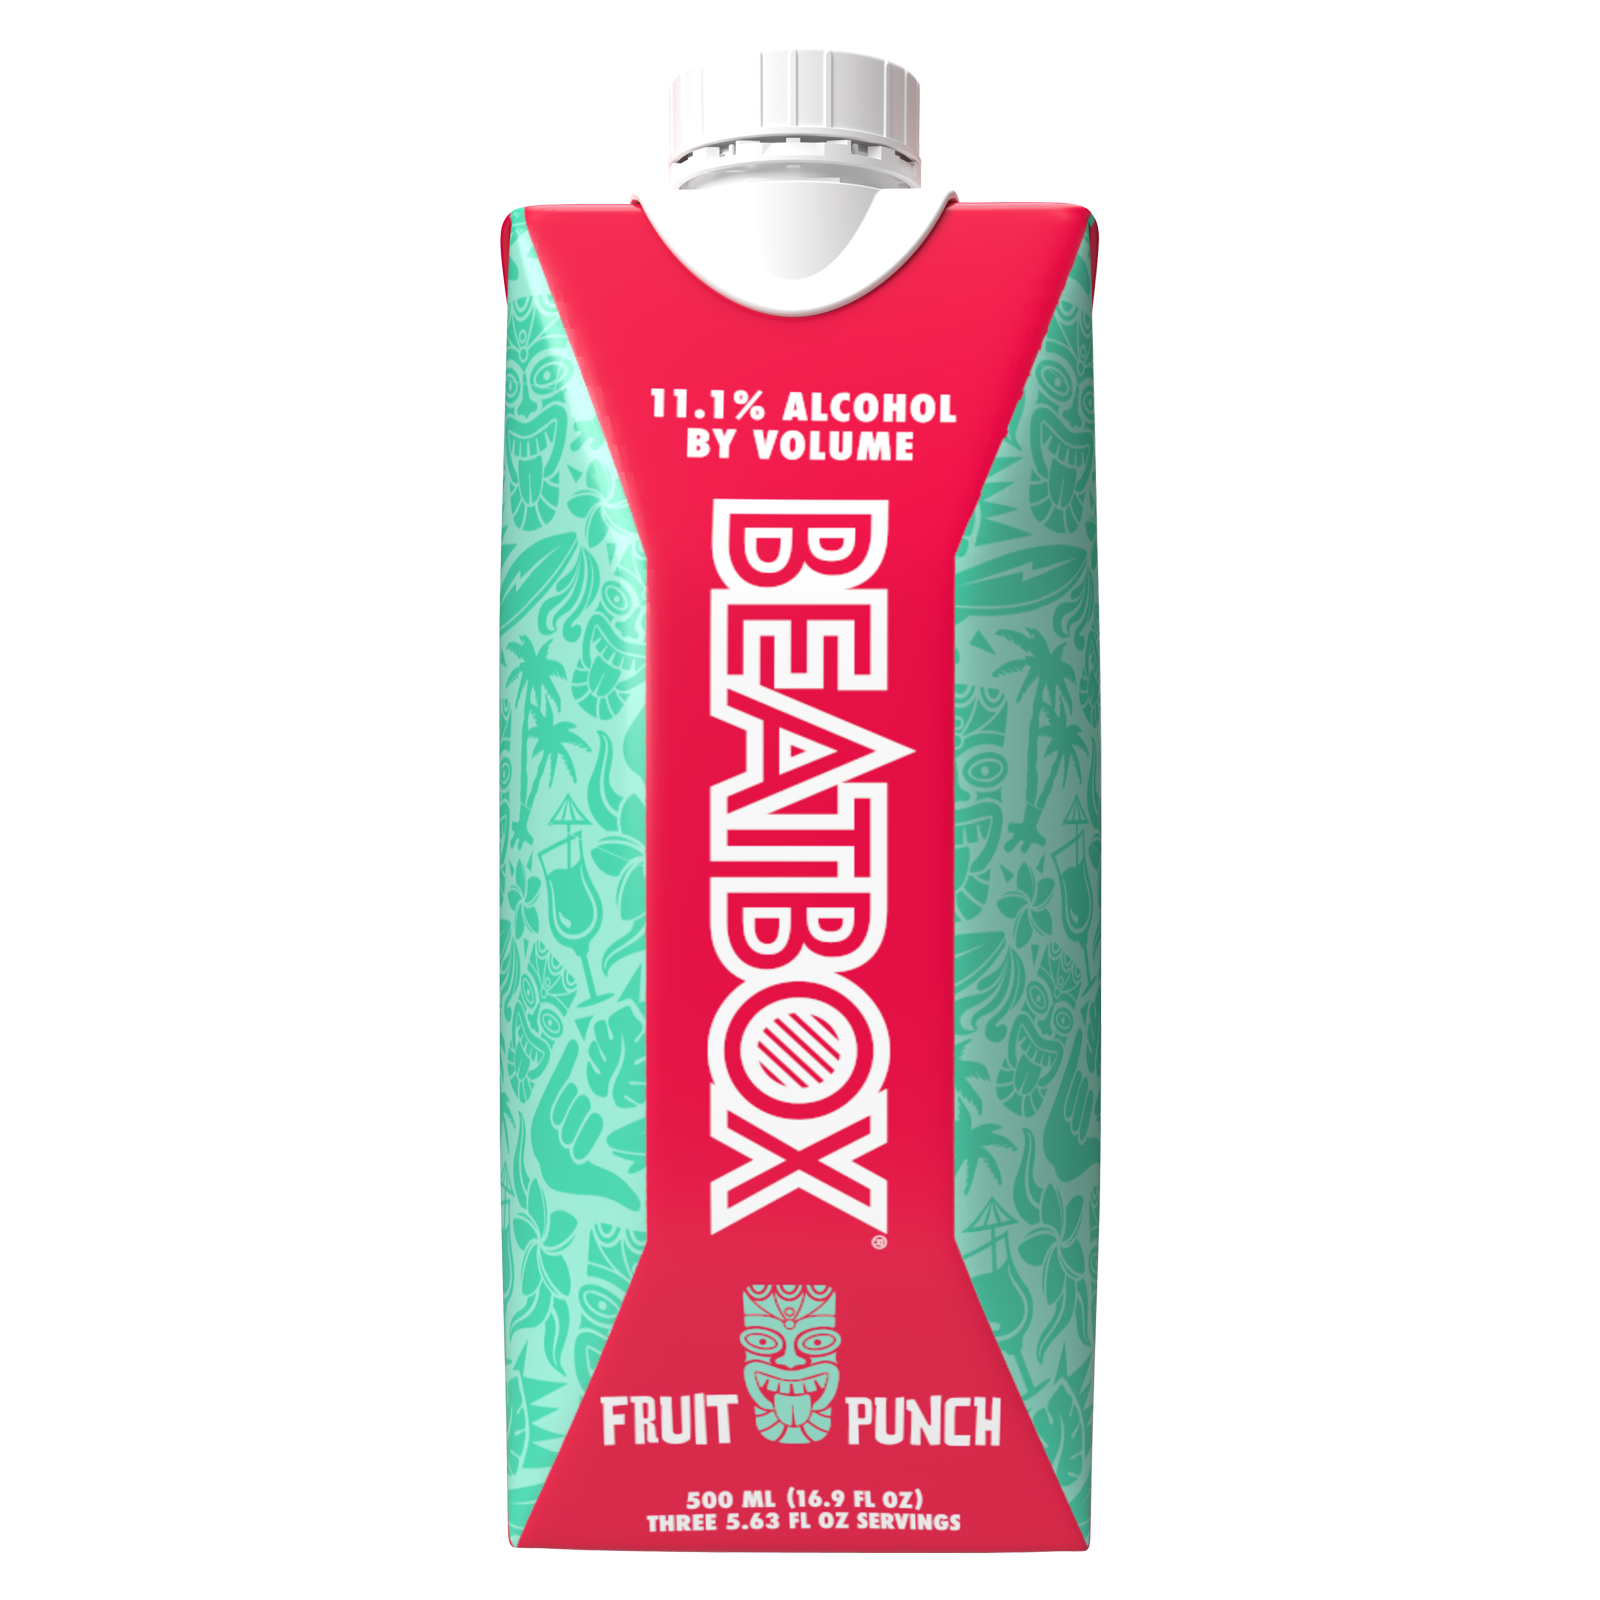 BeatBox Fruit Punch 500ml 11.1% ABV Party Punch